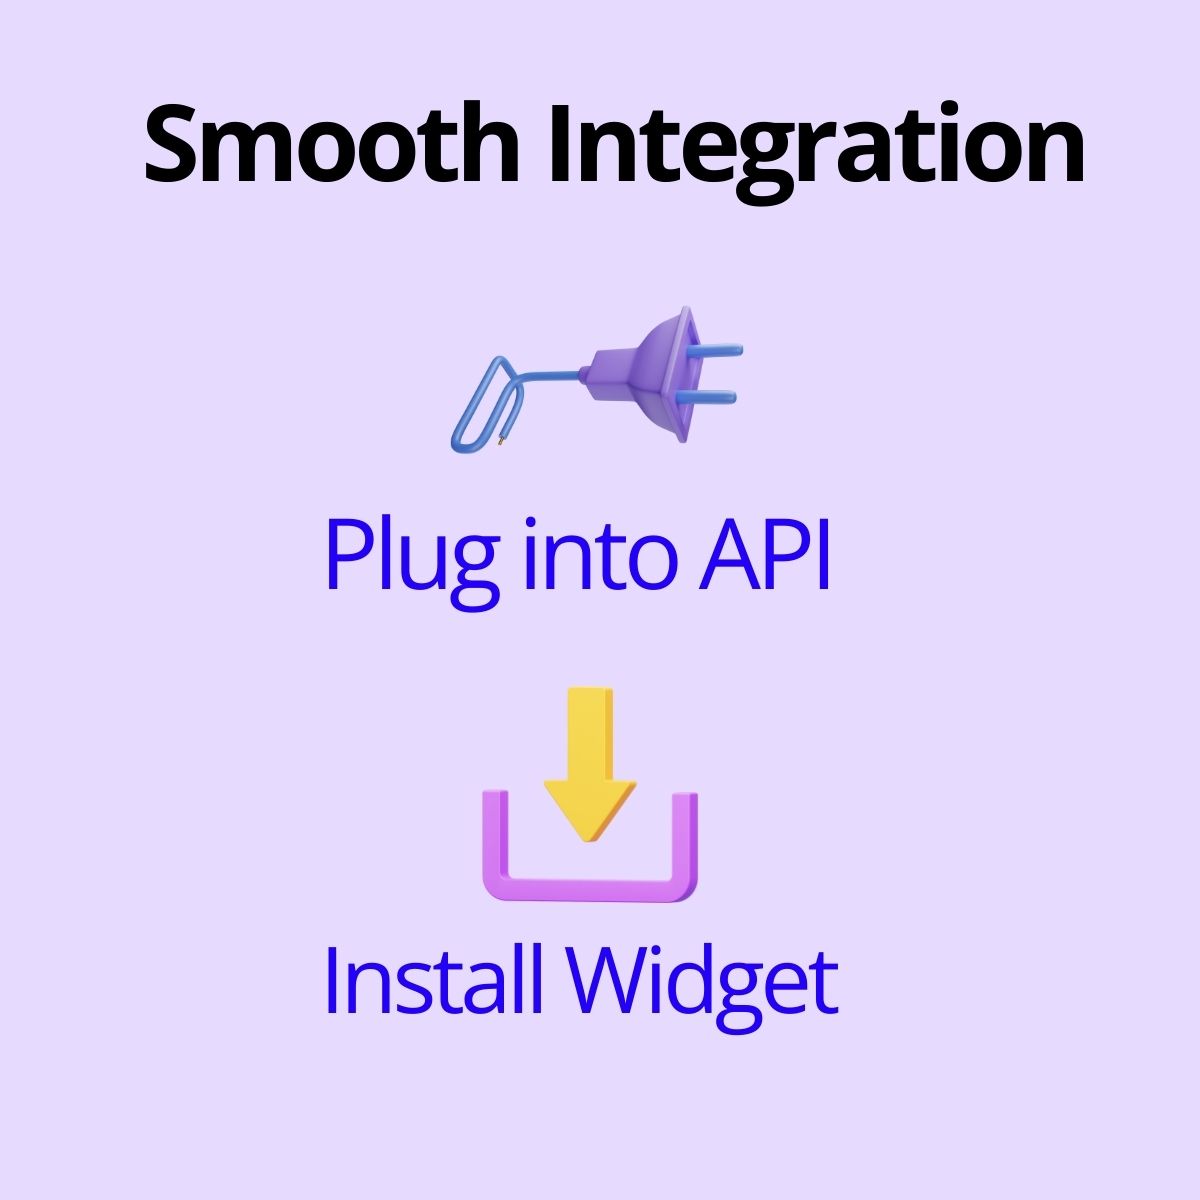 Two 3D symbols to depict smooth integration compared to other eCommerce AI tools